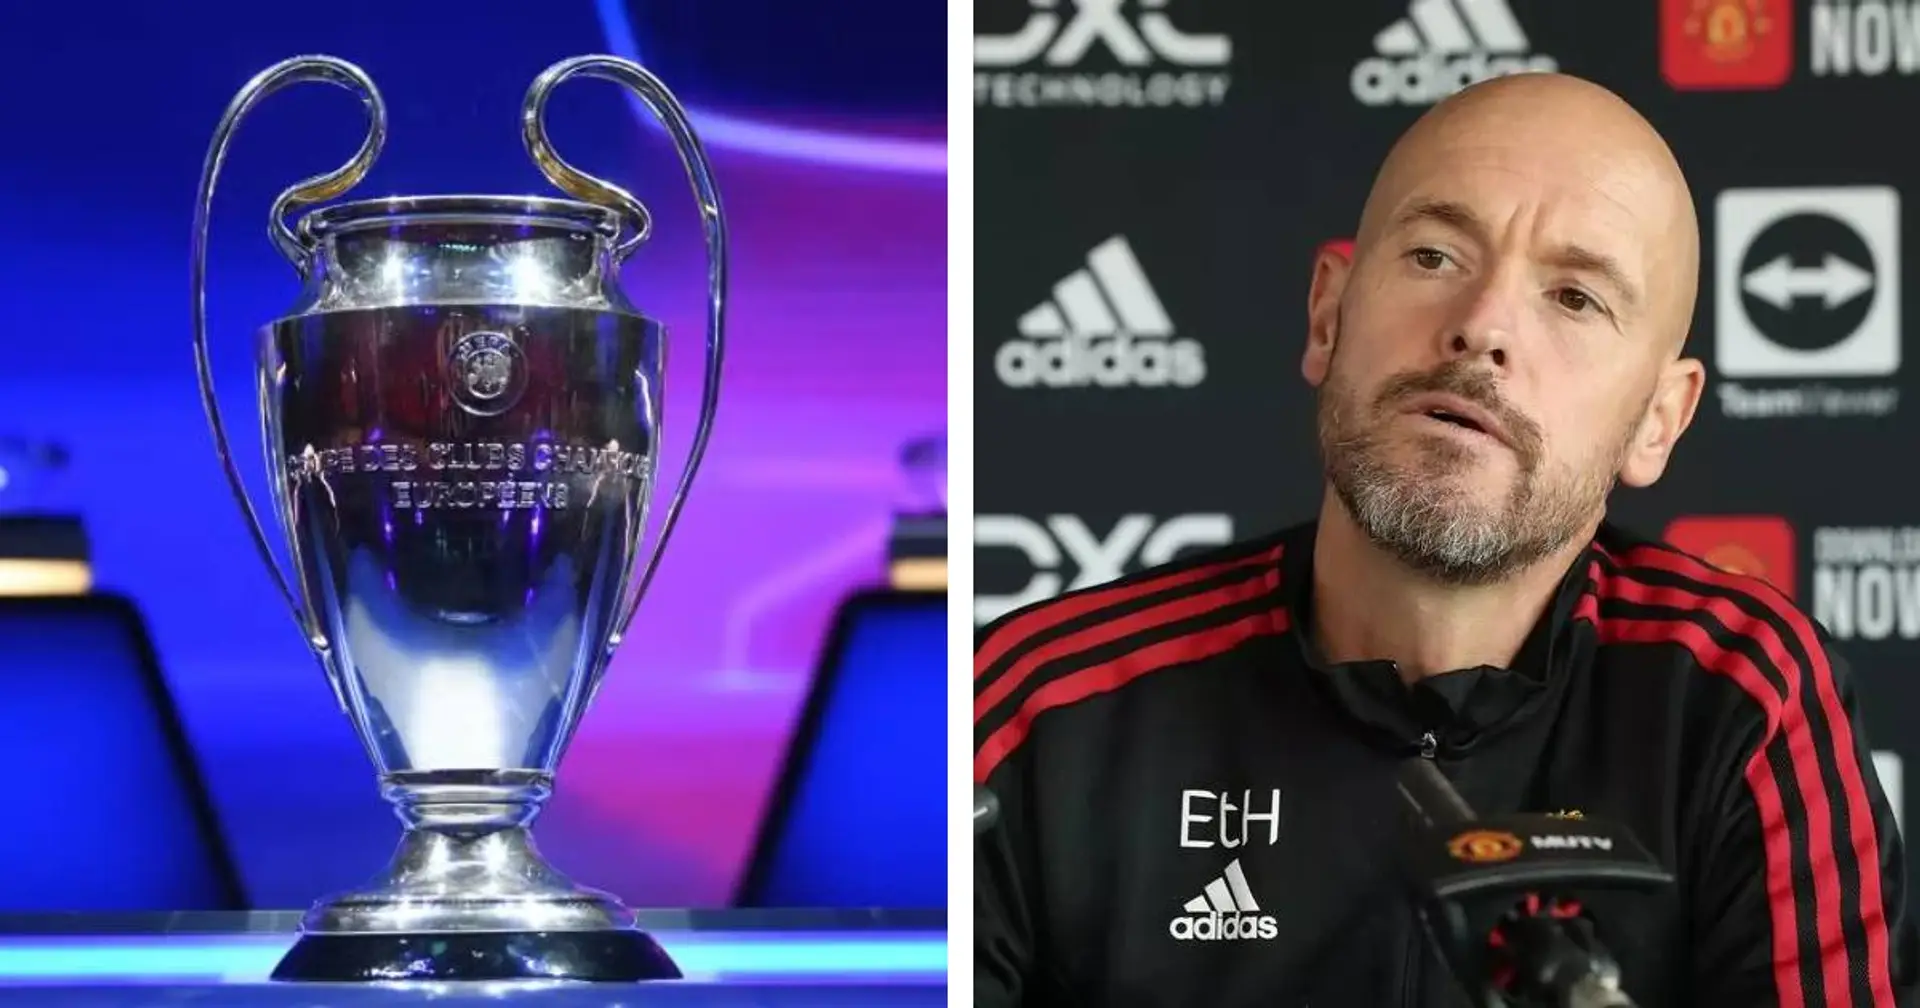 Ten Hag insists Man United can attract top players without Champions League